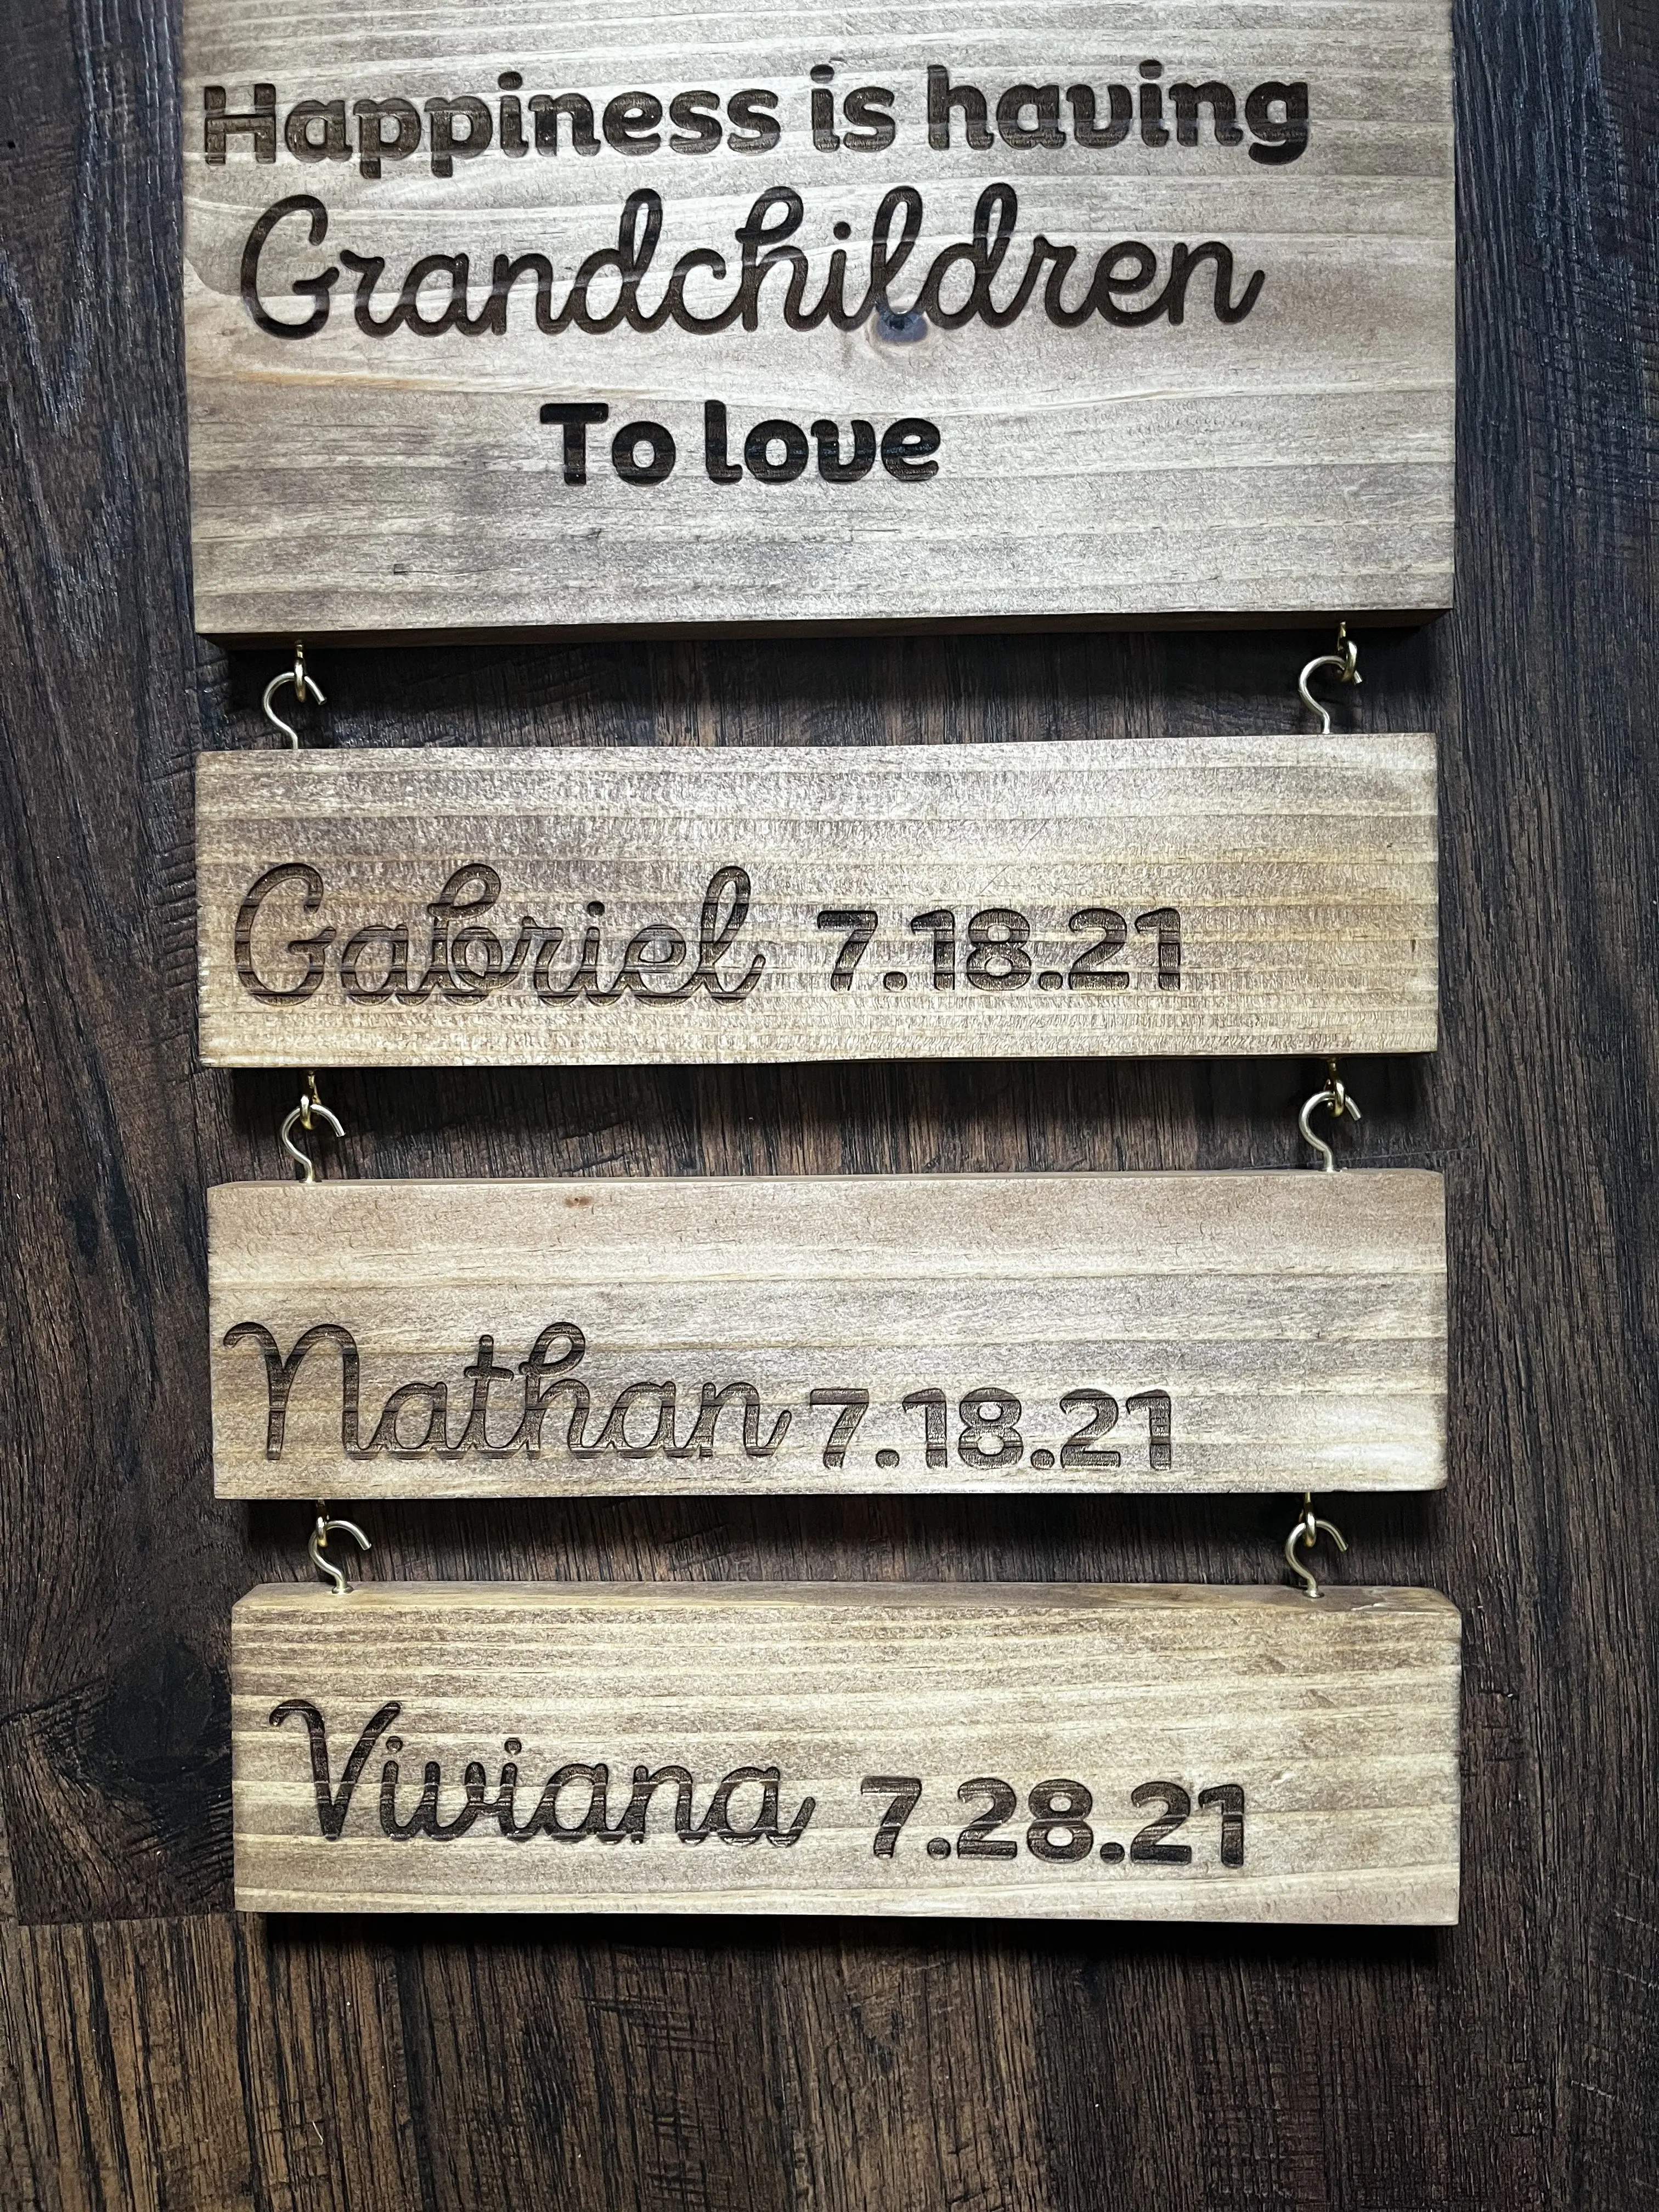 A wooden sign with childrens' names on it.